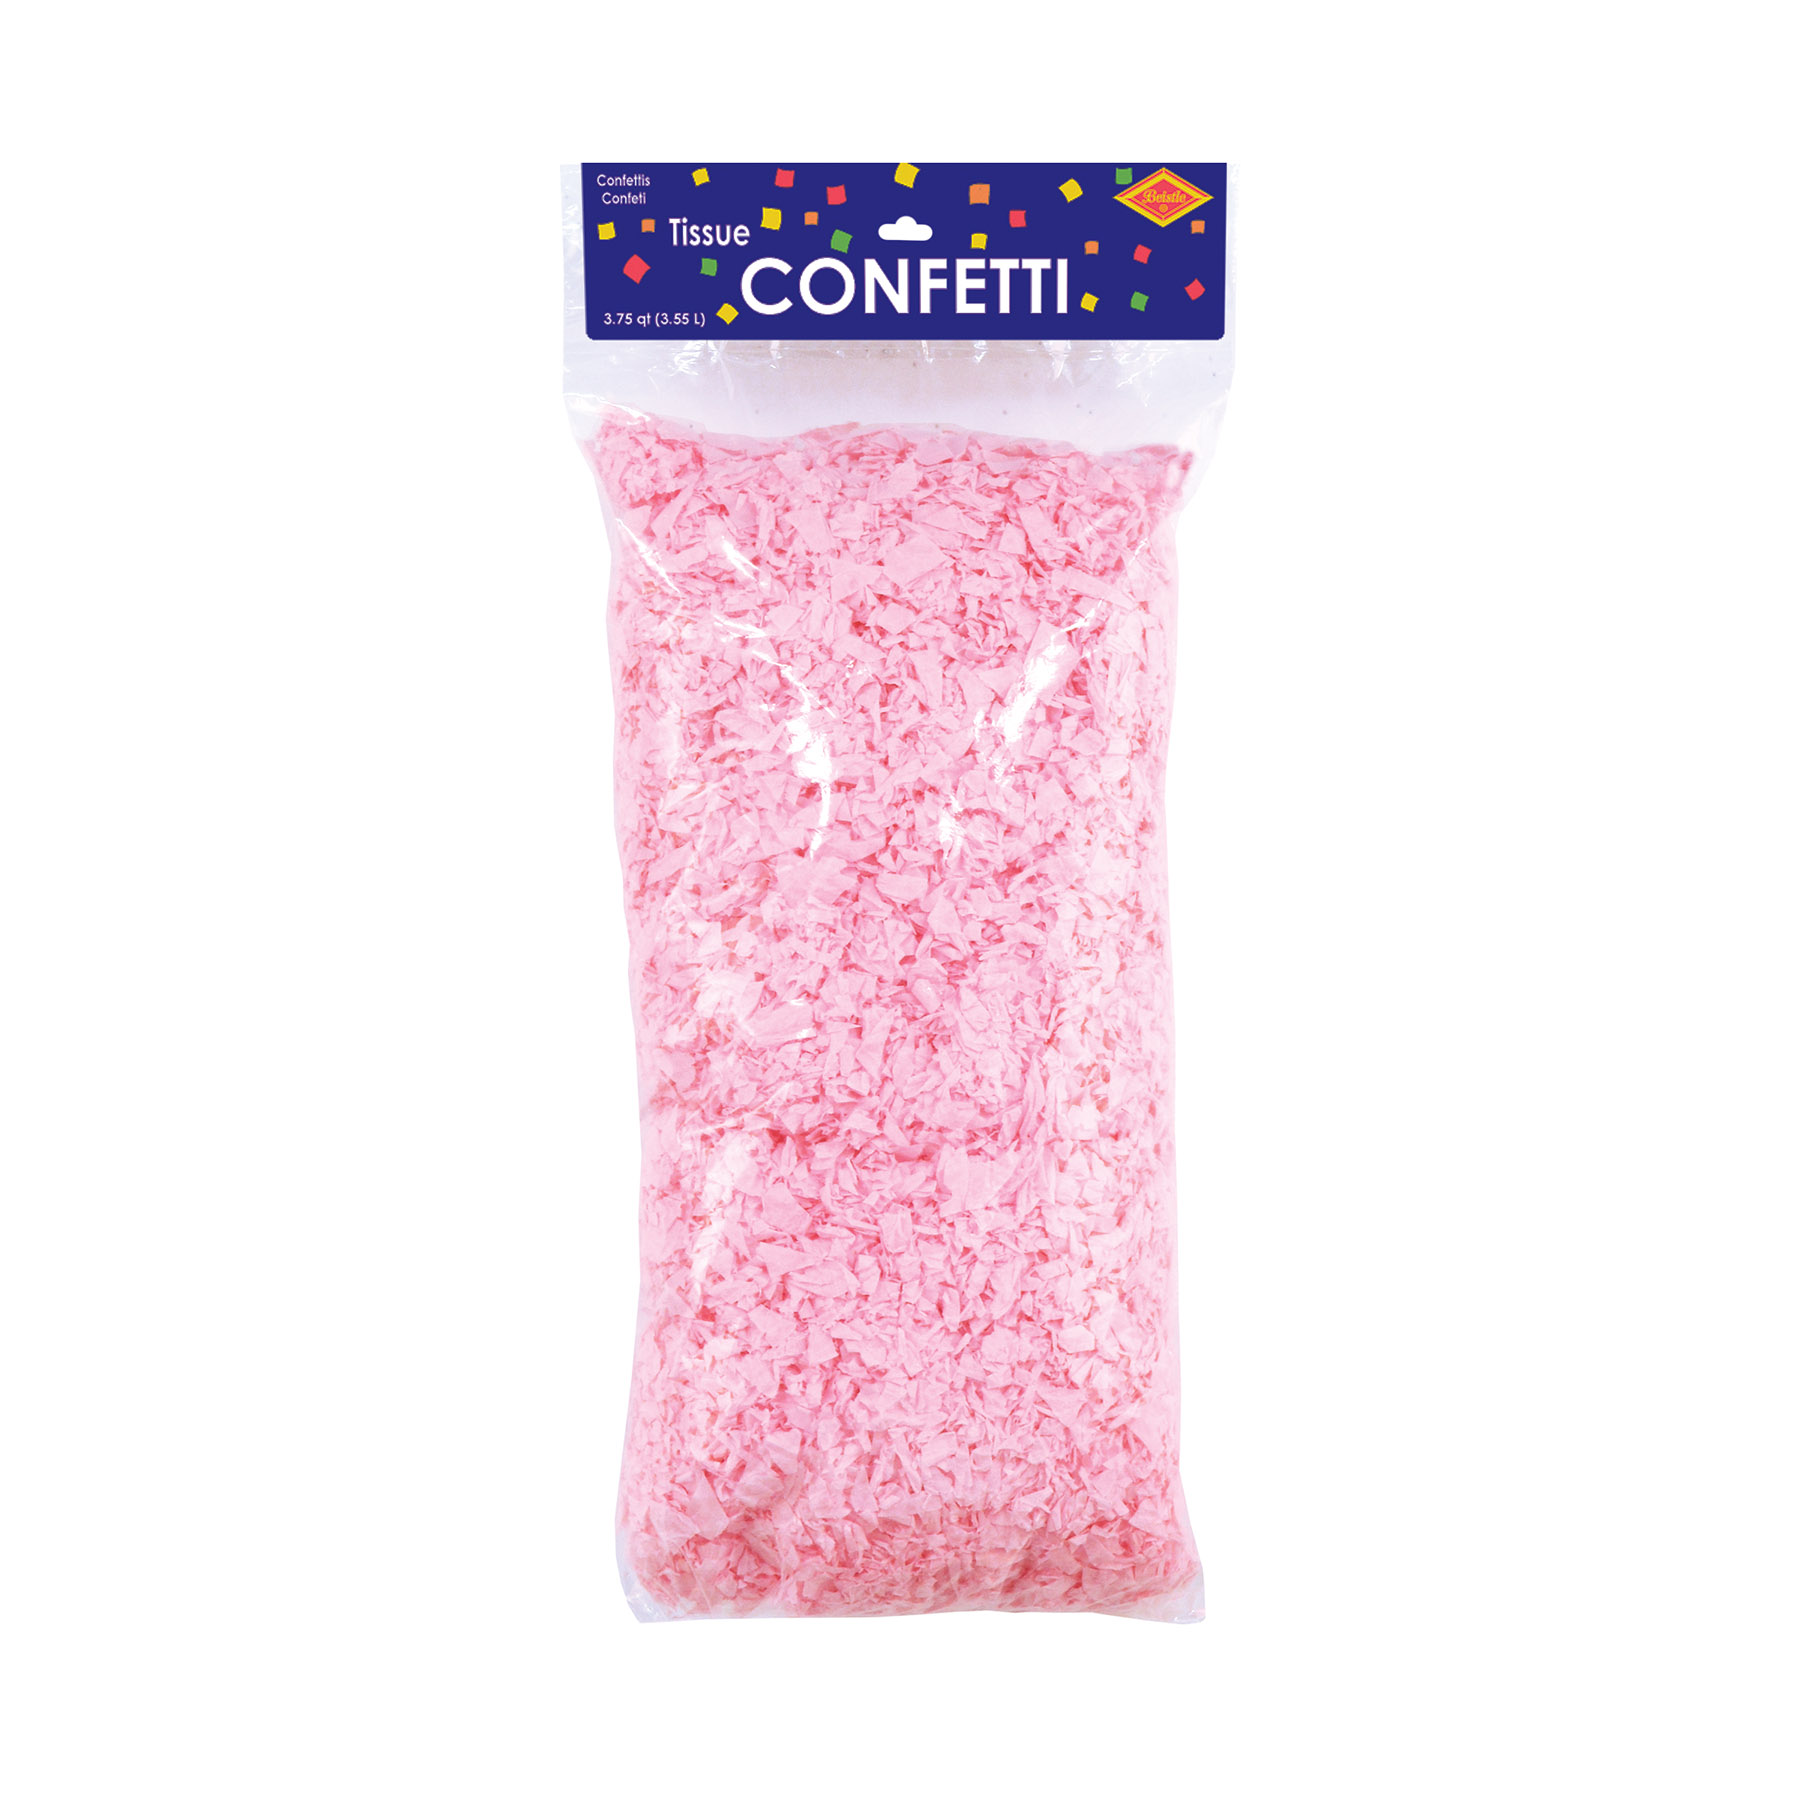 Pink Tissue Confetti (Pack of 6) Pink Tissue Confetti, decoration, centerpiece, party favor, valentines, new years eve, easter, wholesale, inexpensive, bulk